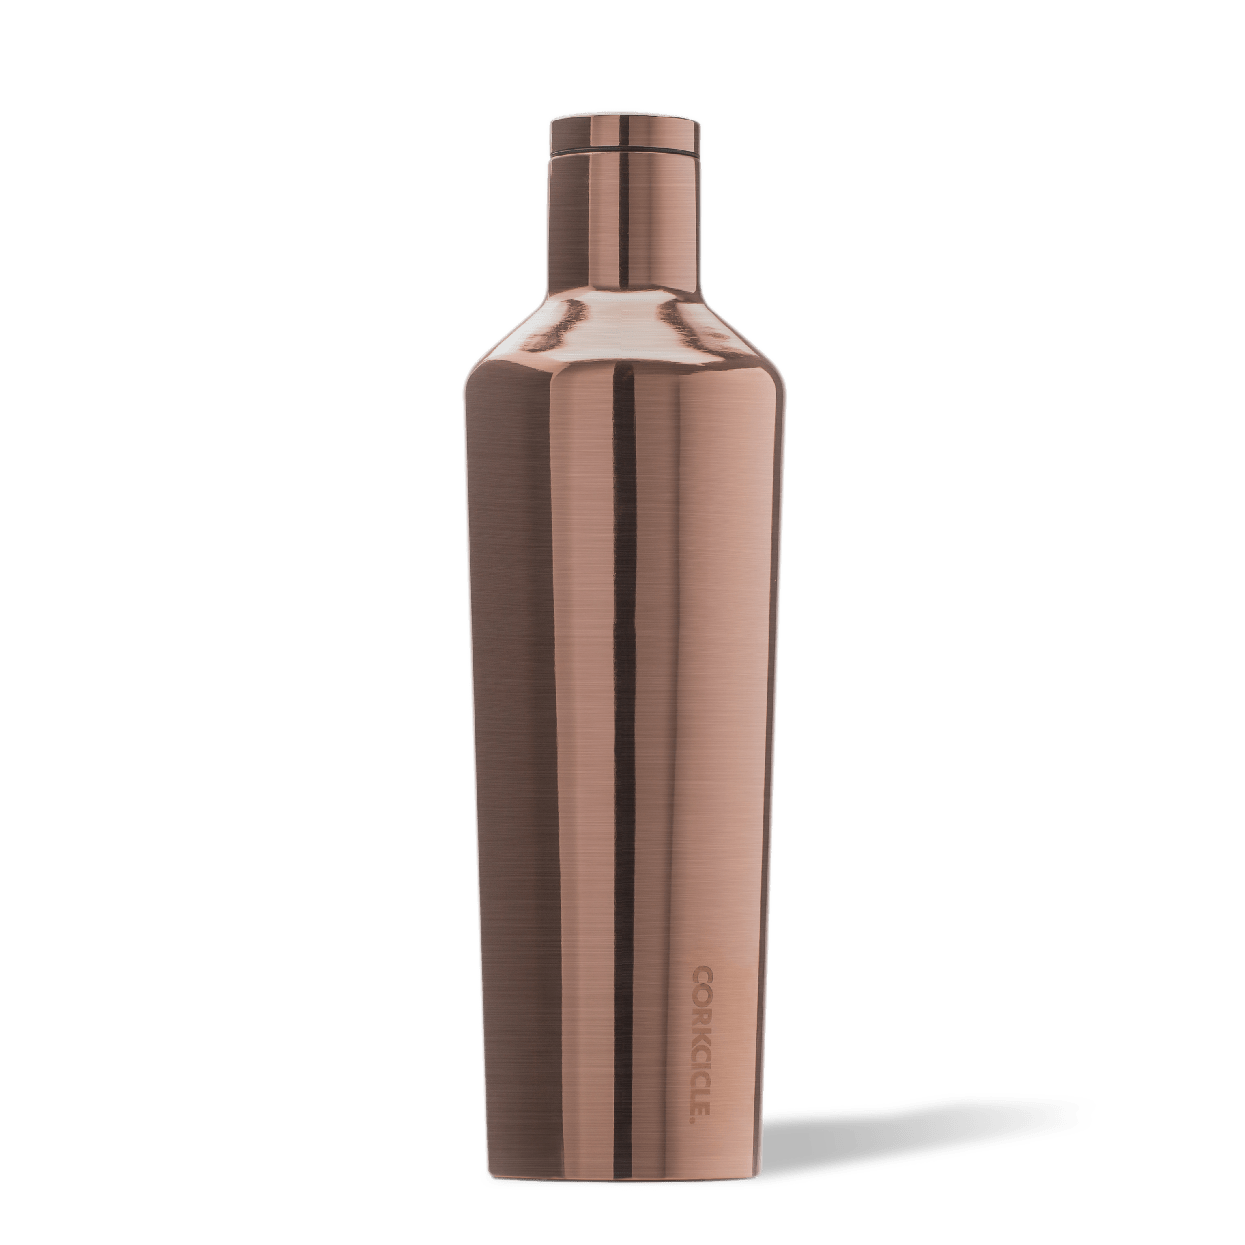 Corkcicle Copper 25oz Canteen Side View.